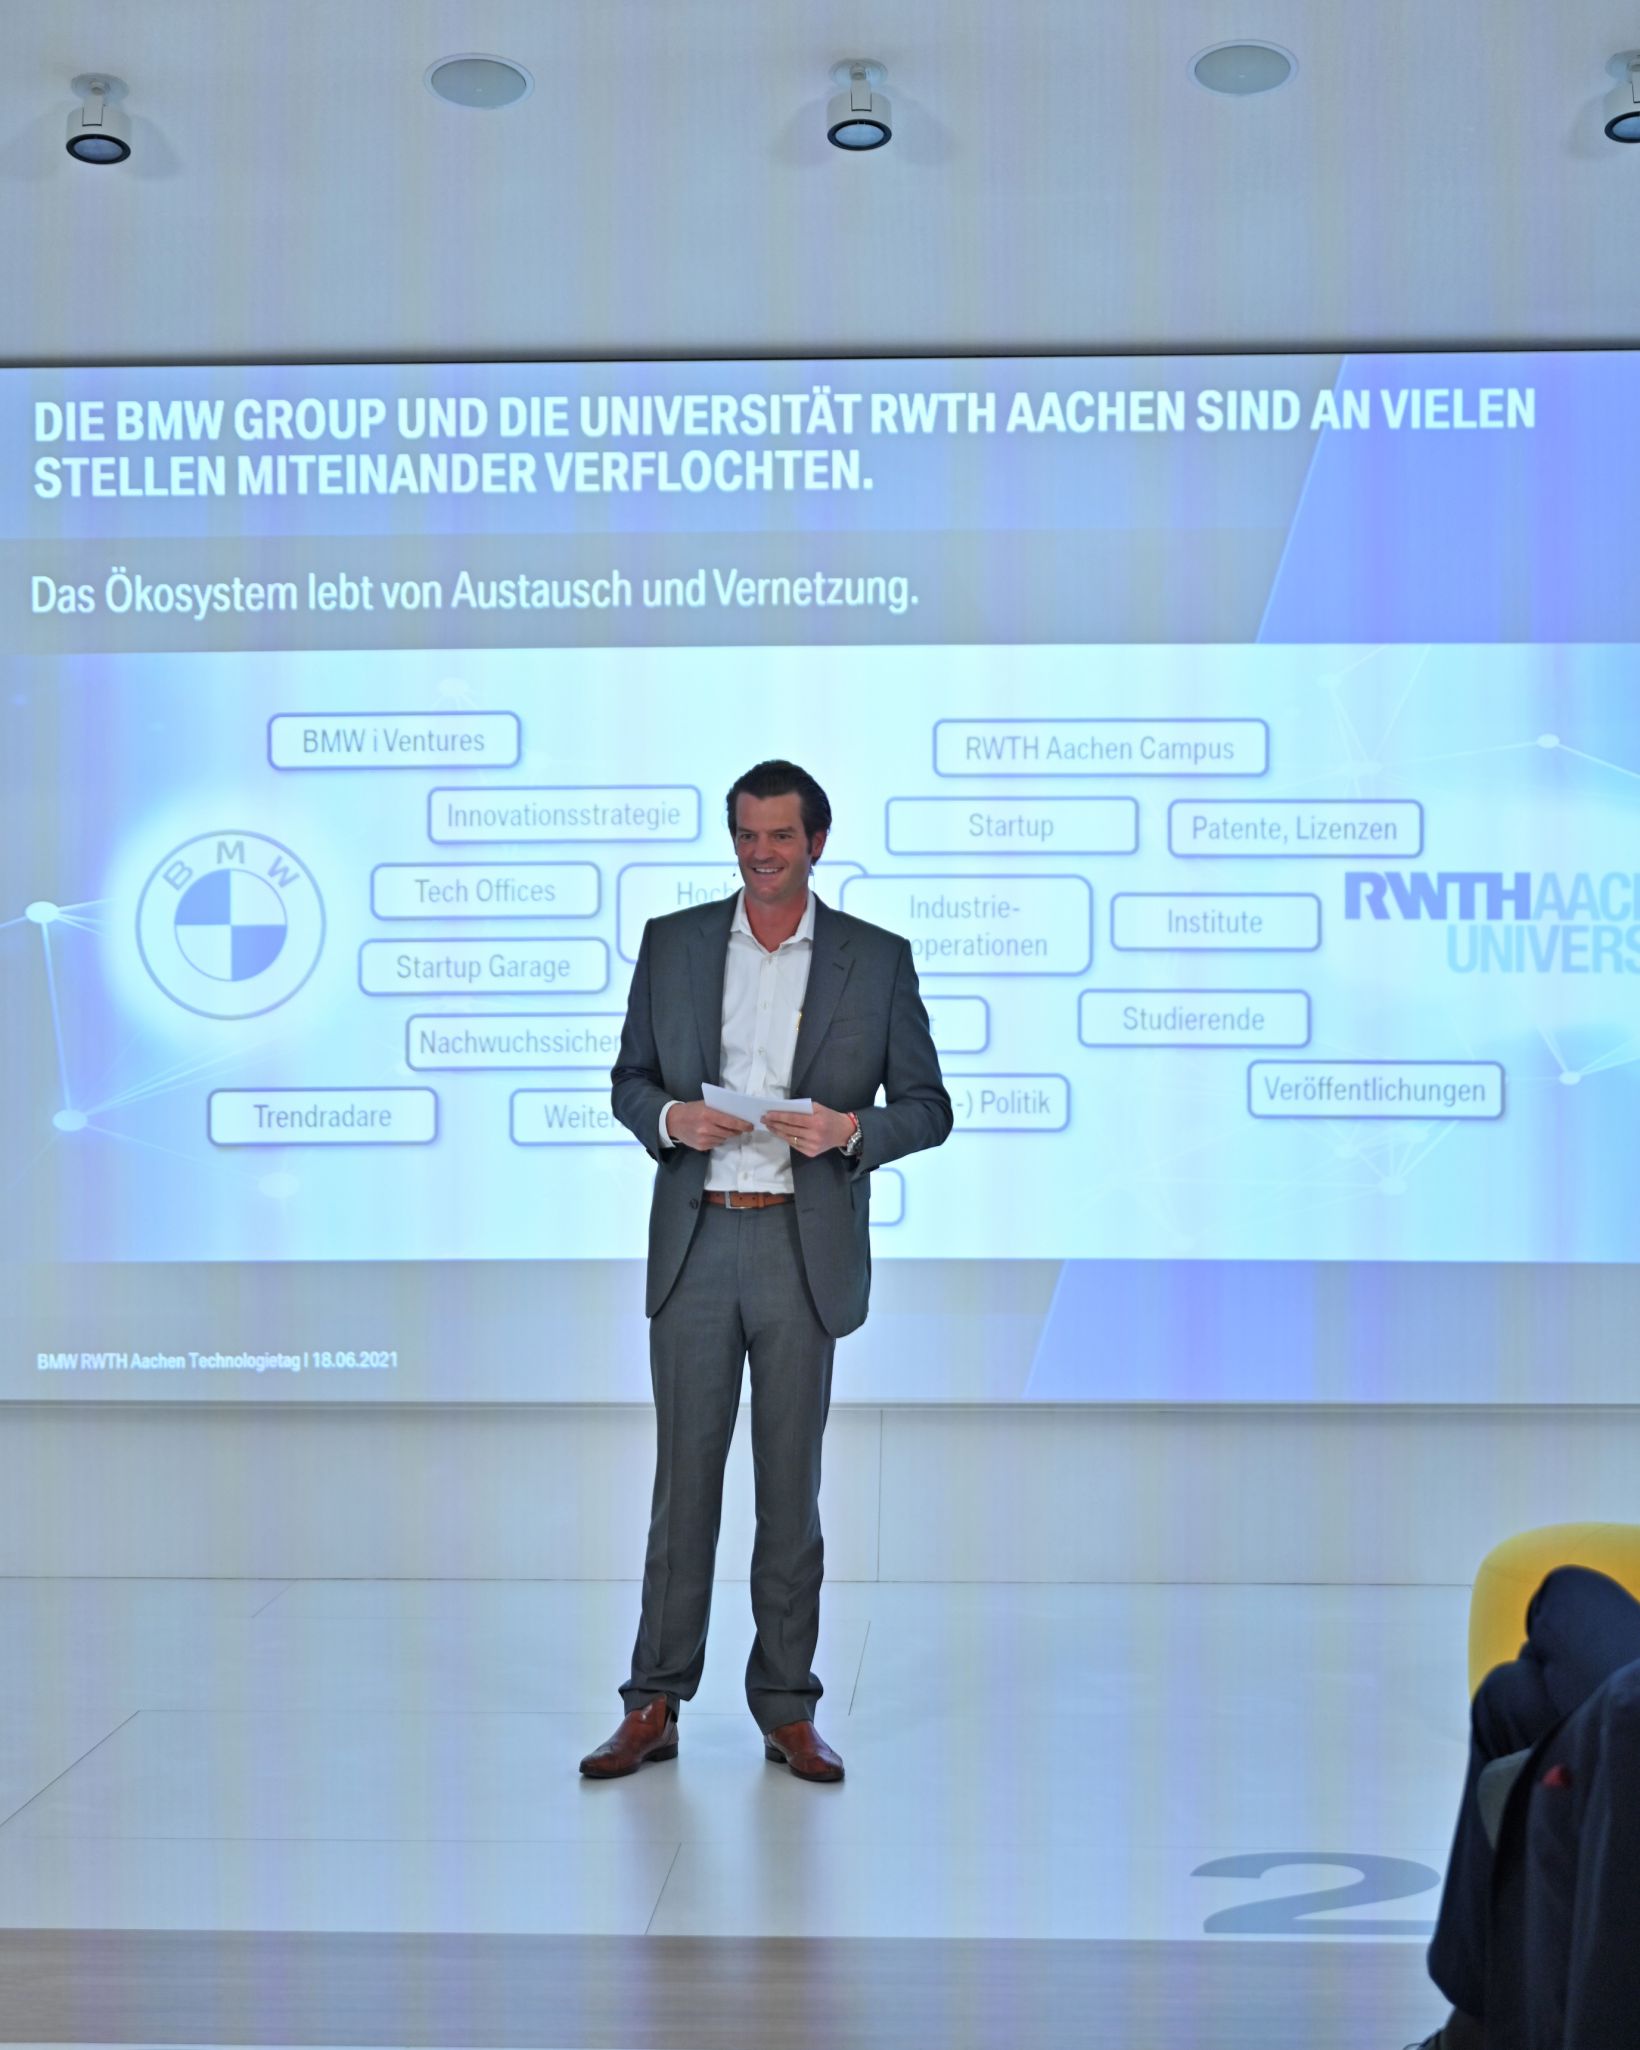 Dr. Stefan Floeck, Senior Vice President Body, Exterior, Interior at BMW Group and Executive Mentor for the RWTH cooperation